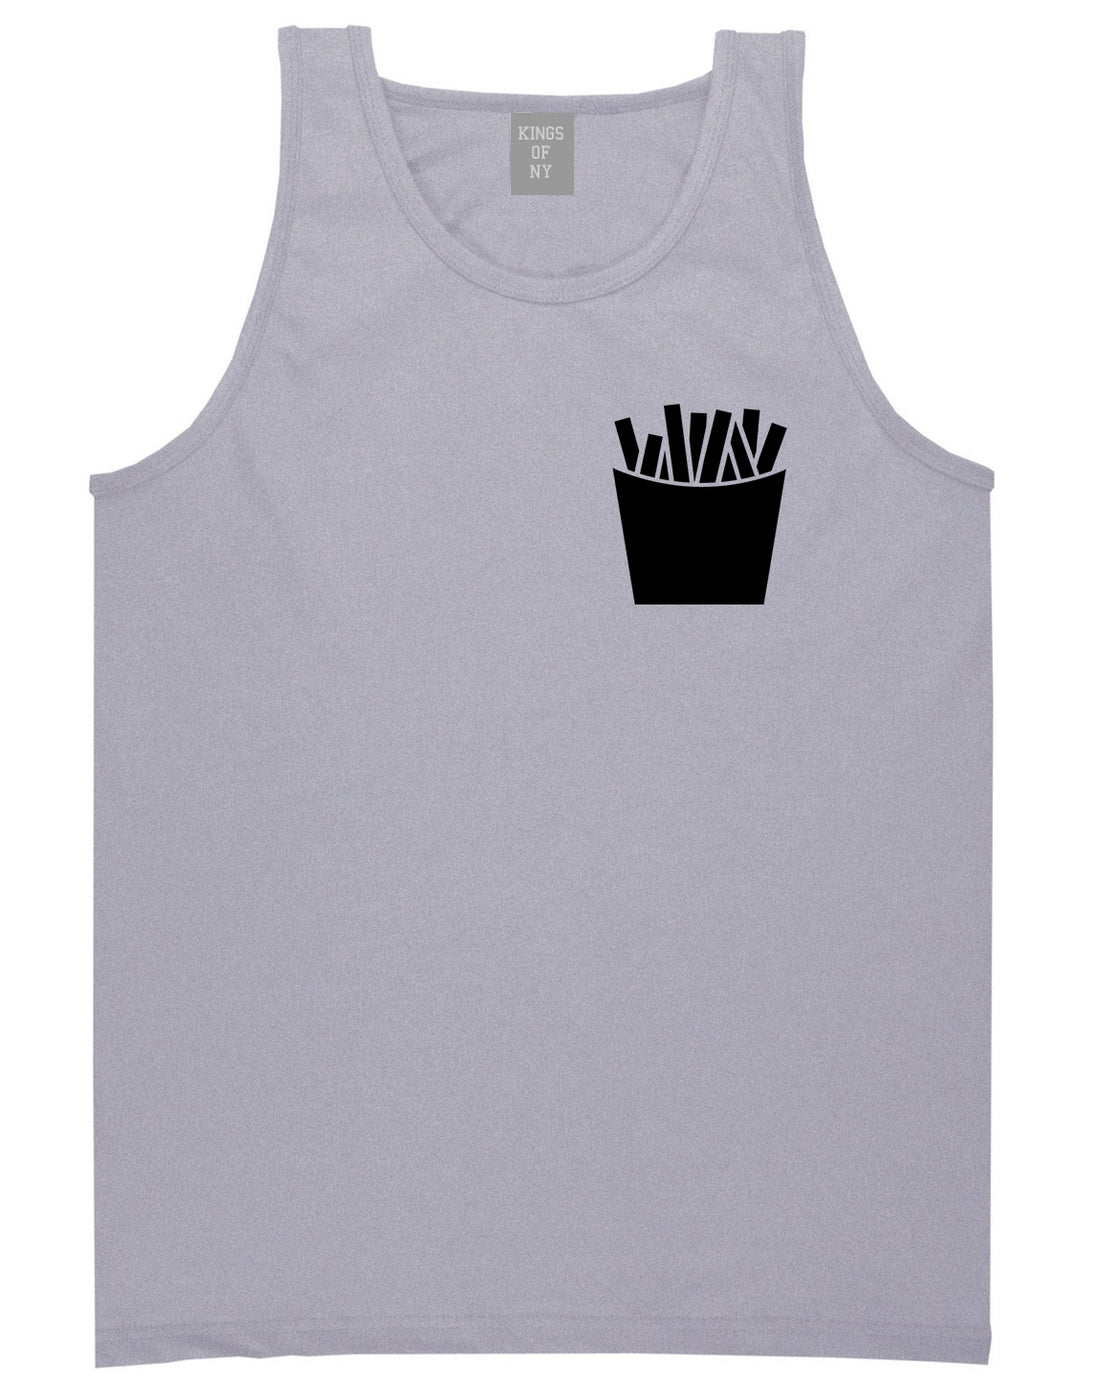 French Fry Fries Chest Mens Grey Tank Top Shirt by KINGS OF NY